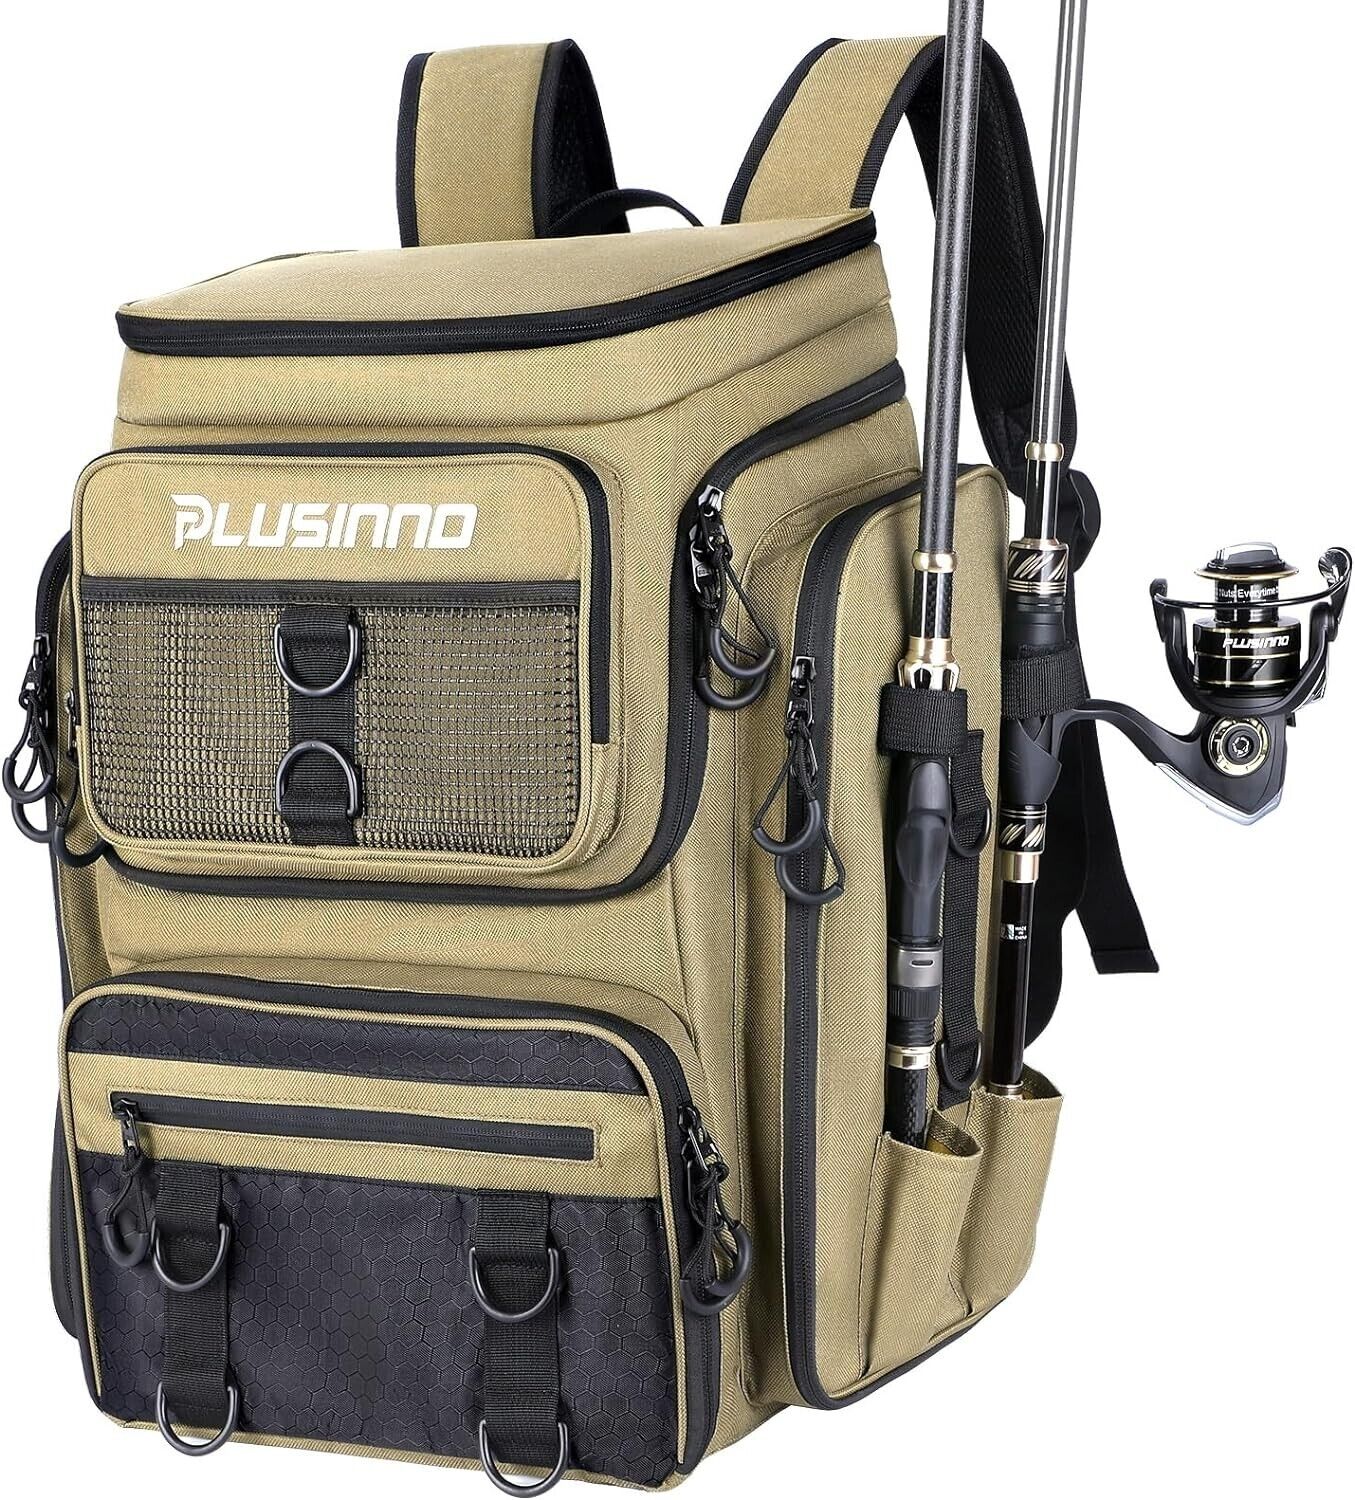 PLUSINNO Fishing Backpack with Rod Holders, 42L Large Water-resistant Fishing...